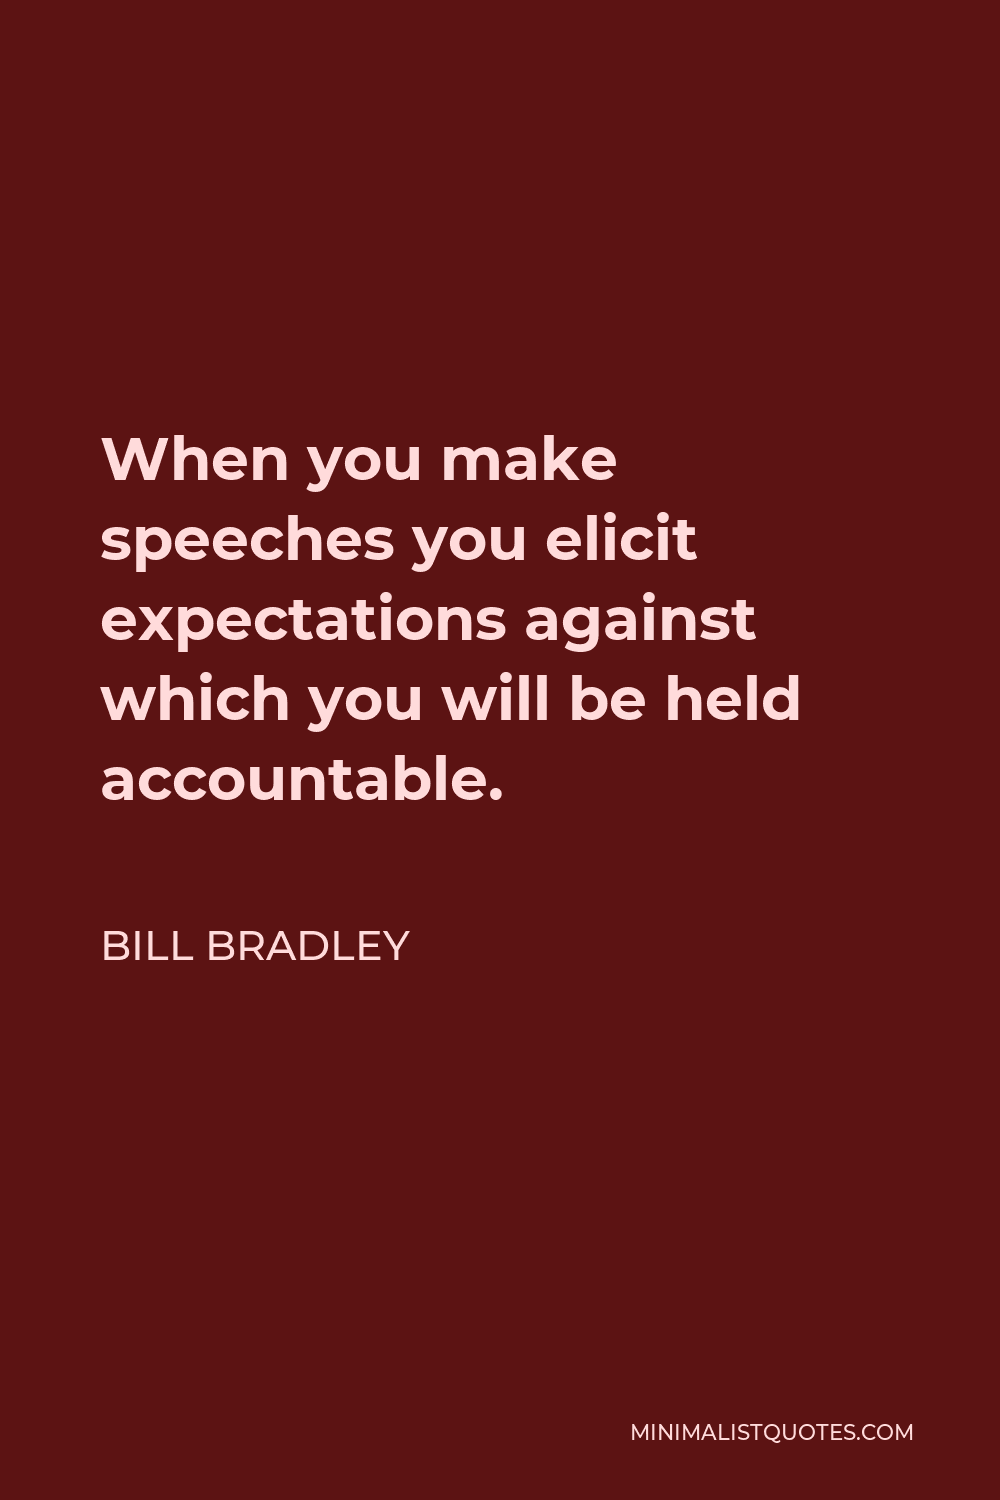 Bill Bradley Quote - When you make speeches you elicit expectations against which you will be held accountable.